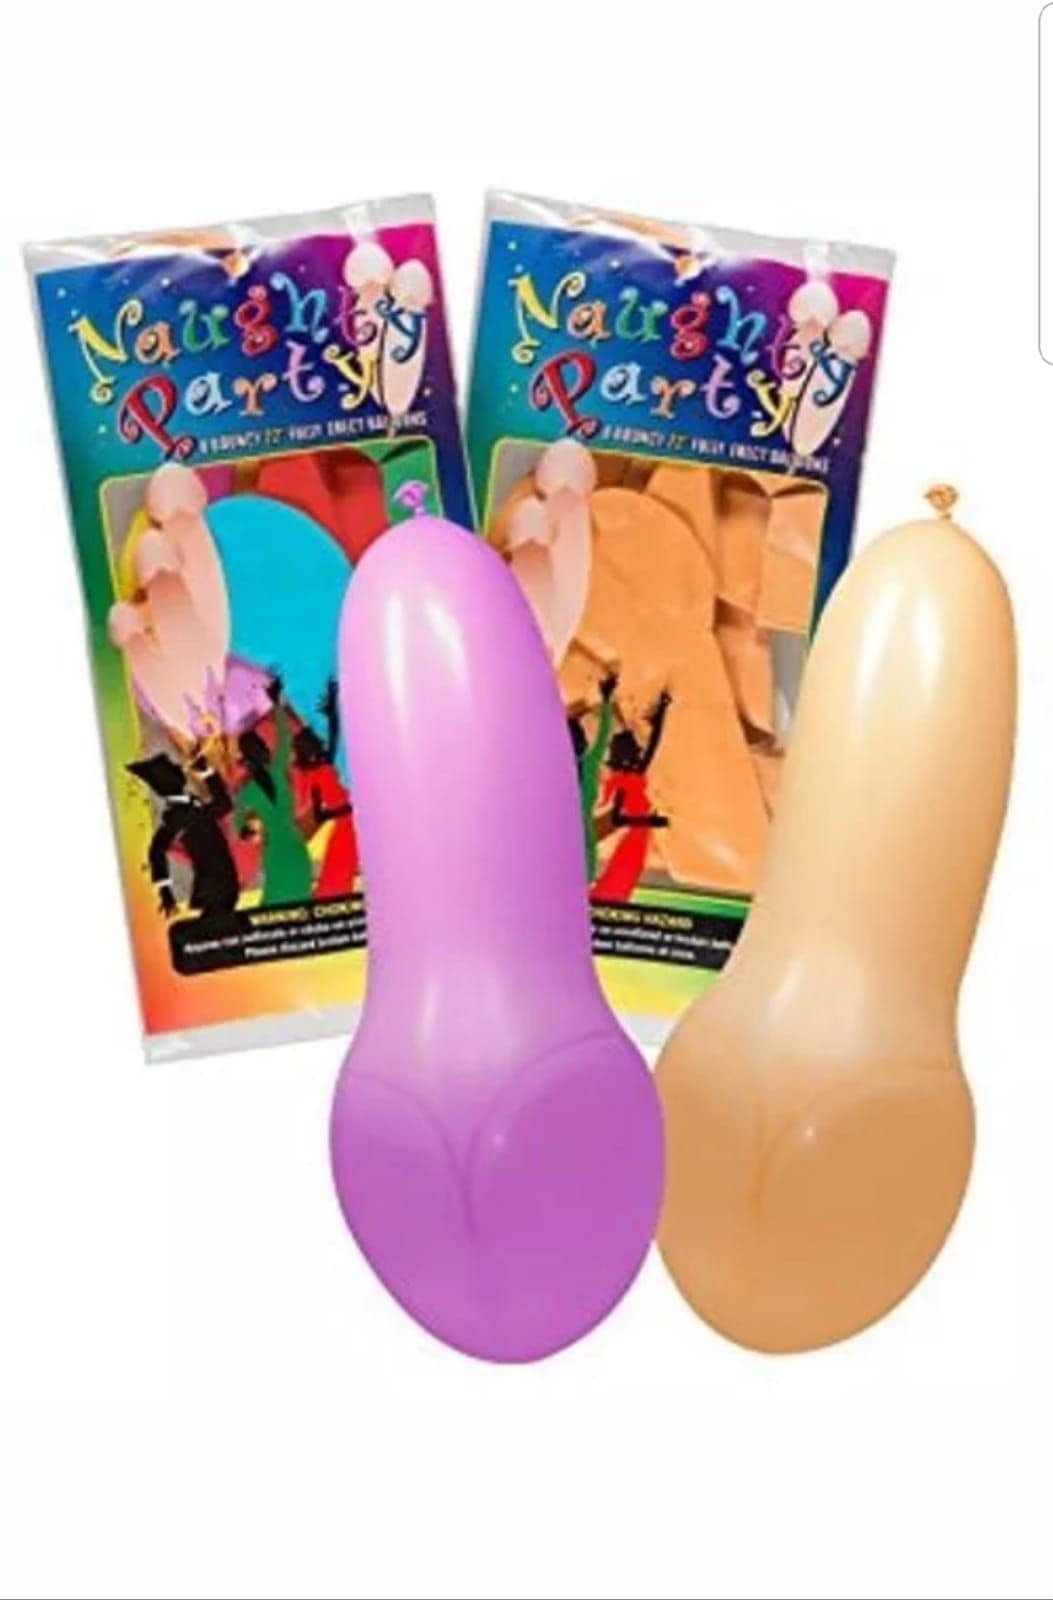 Naughty Penis Party Balloons